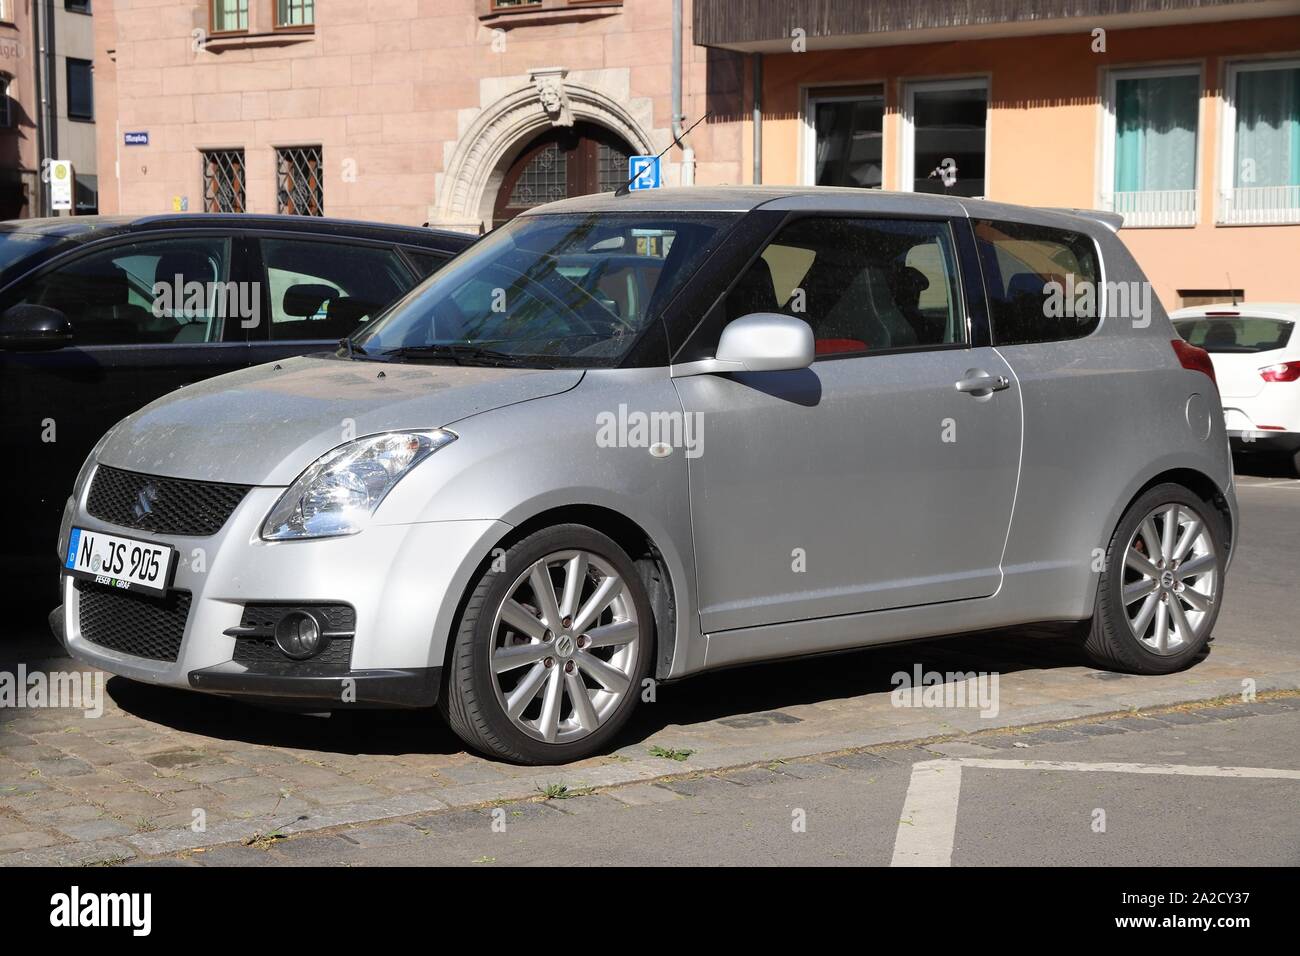 NUREMBERG, GERMANY - MAY 6, 2018: Silver Suzuki Swift compact hatchback car parked in Germany. There were 45.8 million cars registered in Germany (as Stock Photo